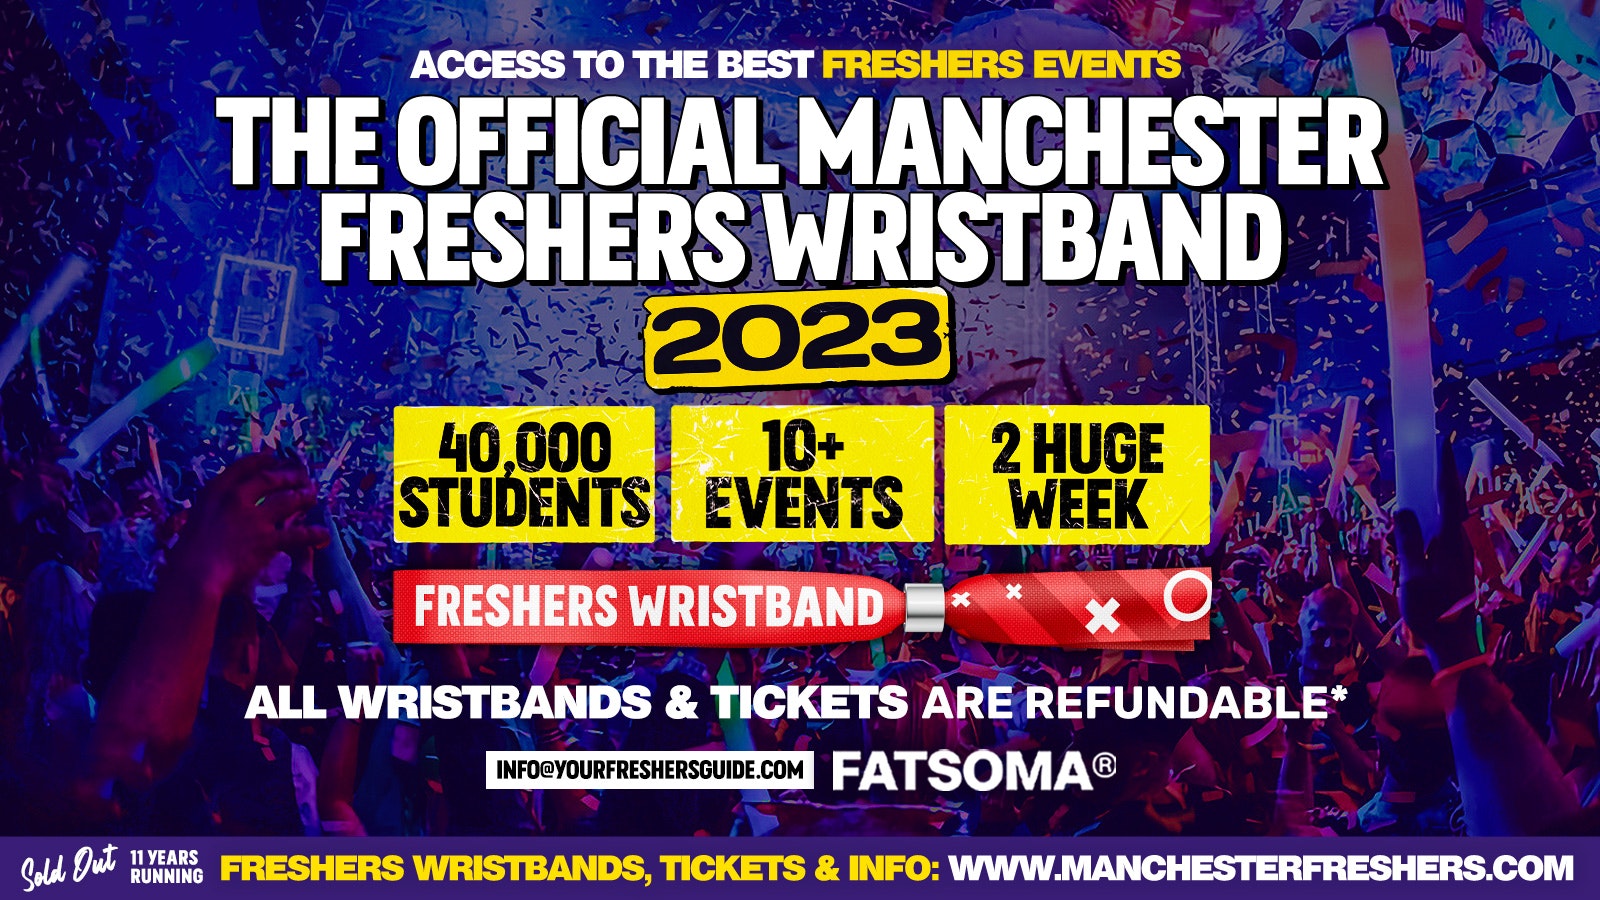 THE OFFICIAL MANCHESTER FRESHERS WRISTBAND 2023 – THE ULTIMATE FRESHERS EXPERIENCE 🏆